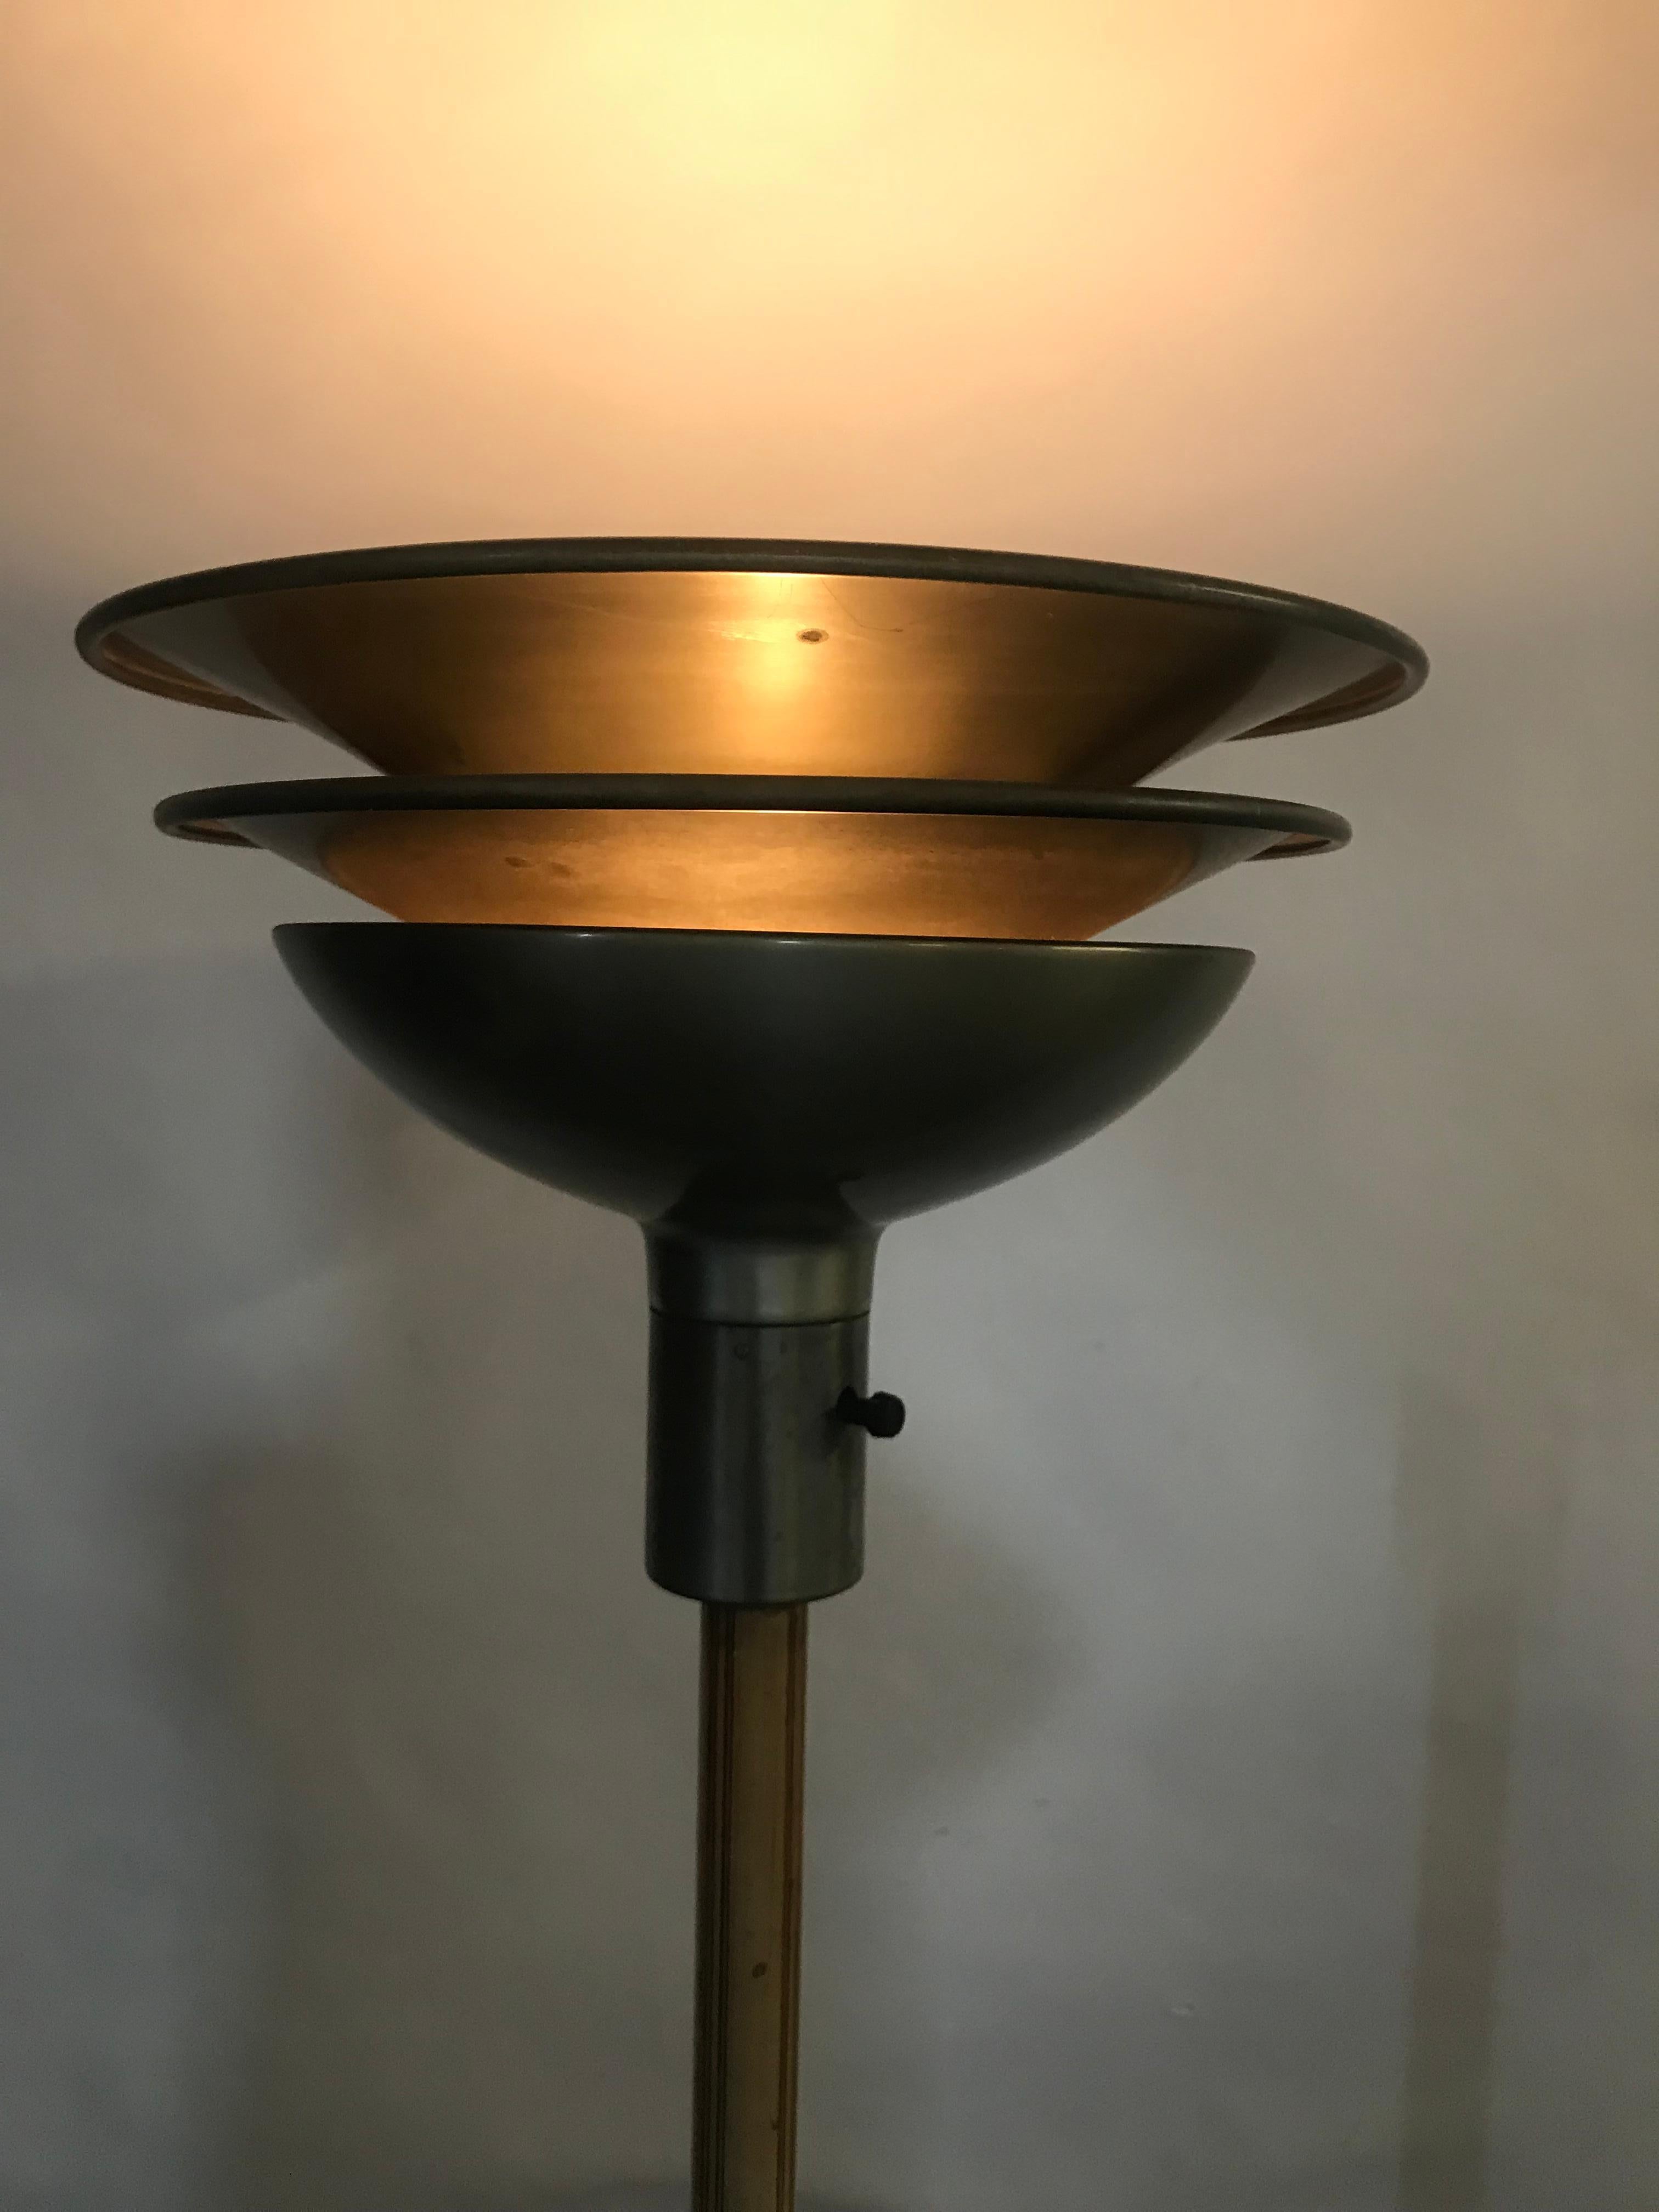 Classic 1930s Art Deco, modernist triple-tier torchere by Gilbert Rohde for Mutual Sunset Lamp Co, retains original finish, minor dent to standard.